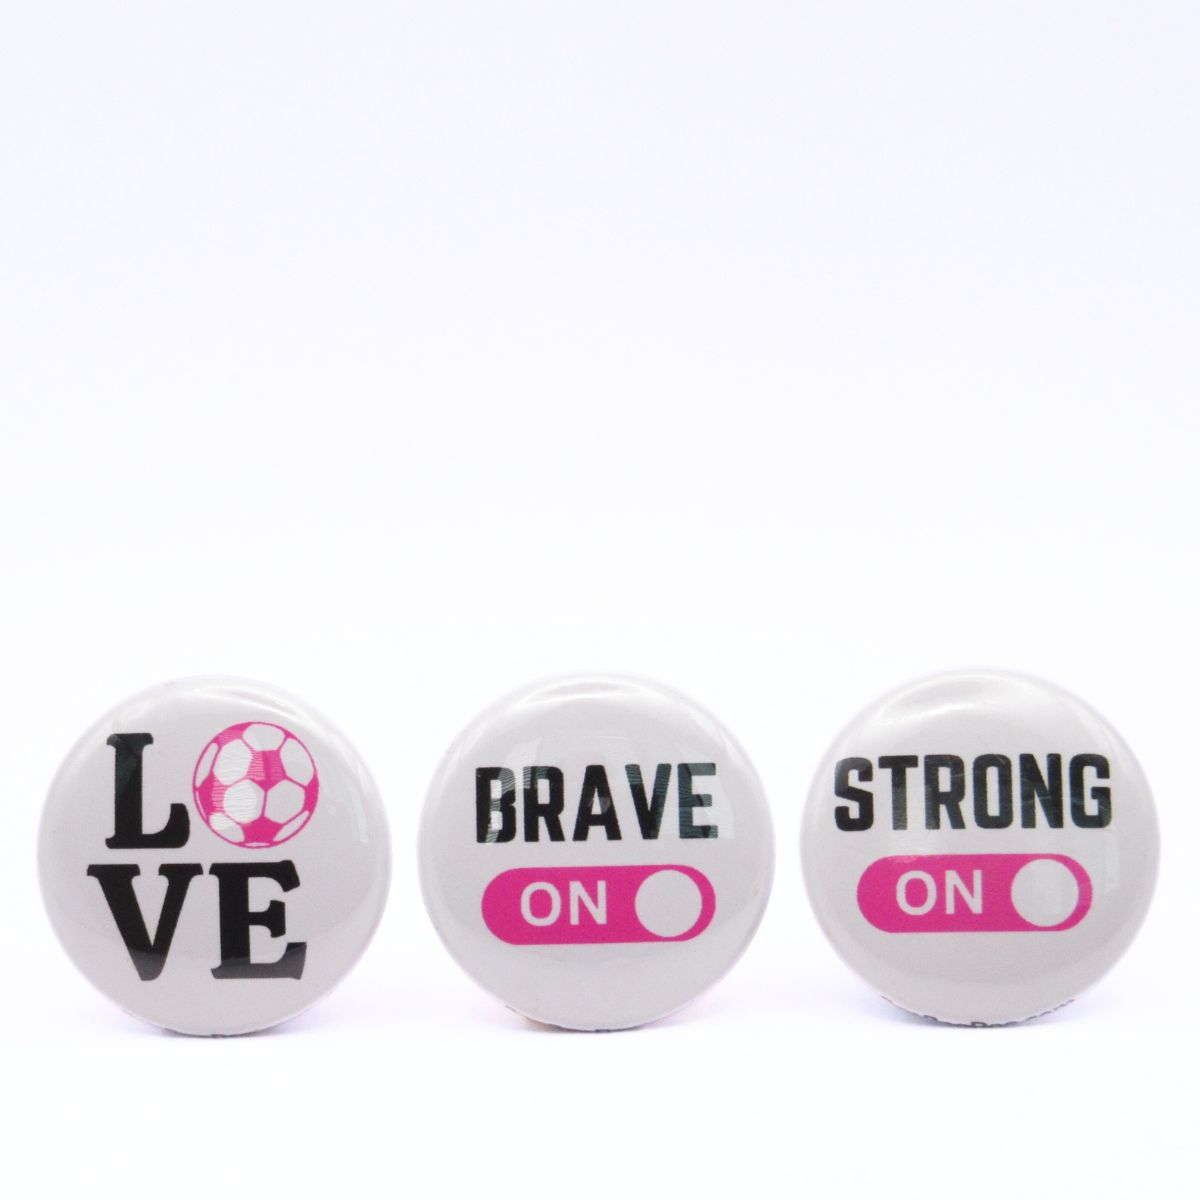 BooBooRoo Pinback Button (i.e. button, badge, pin) 3-pack displaying soccer love, fierce mode on, and strong mode on. Pink background for mode indicator and soccer ball.